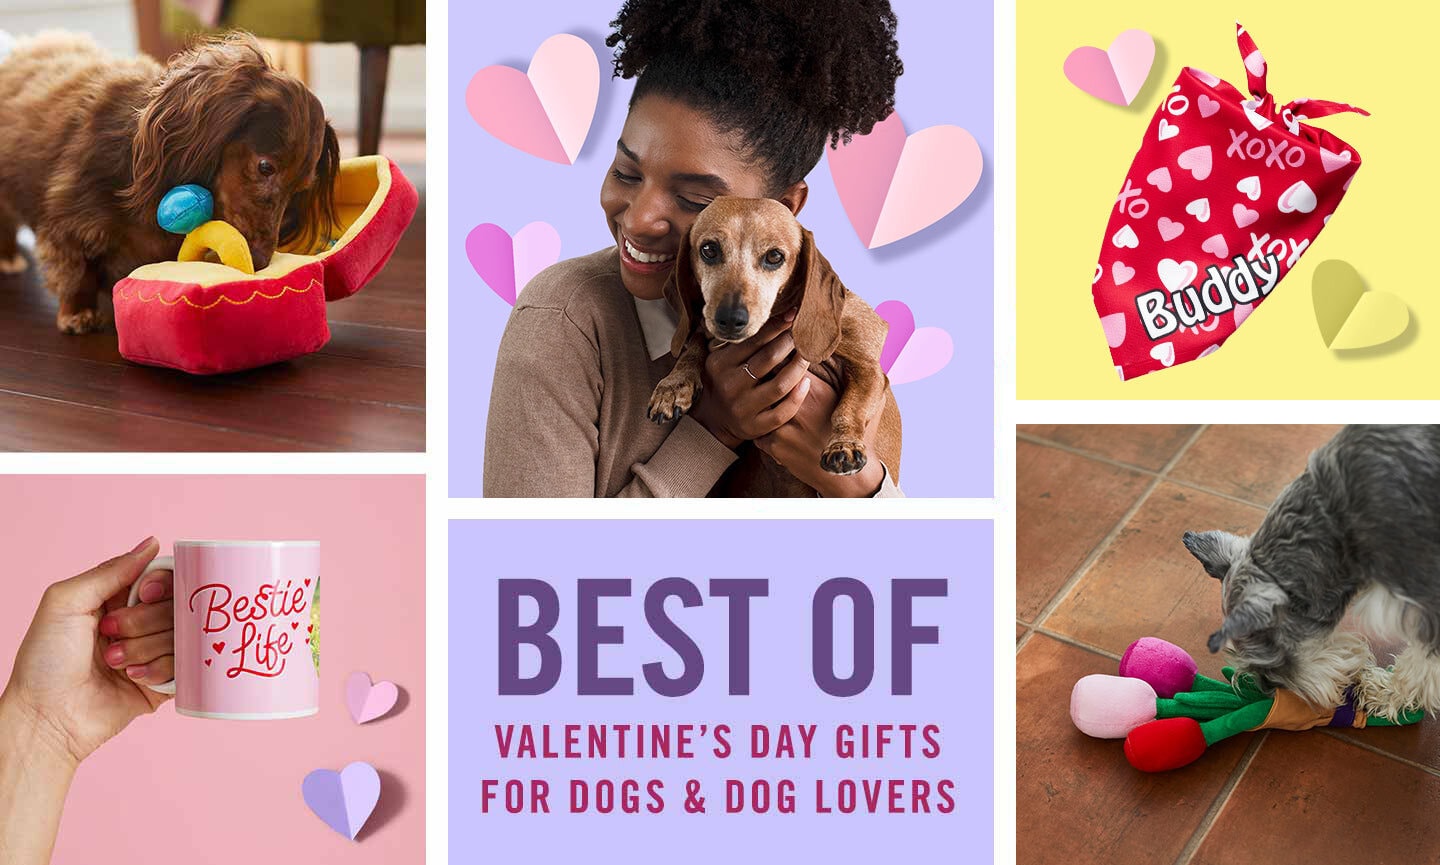 https://media-be.chewy.com/wp-content/uploads/2022/01/23132430/best-valentine-gifts-for-dogs-and-gifts-for-dog-lovers-23.jpg